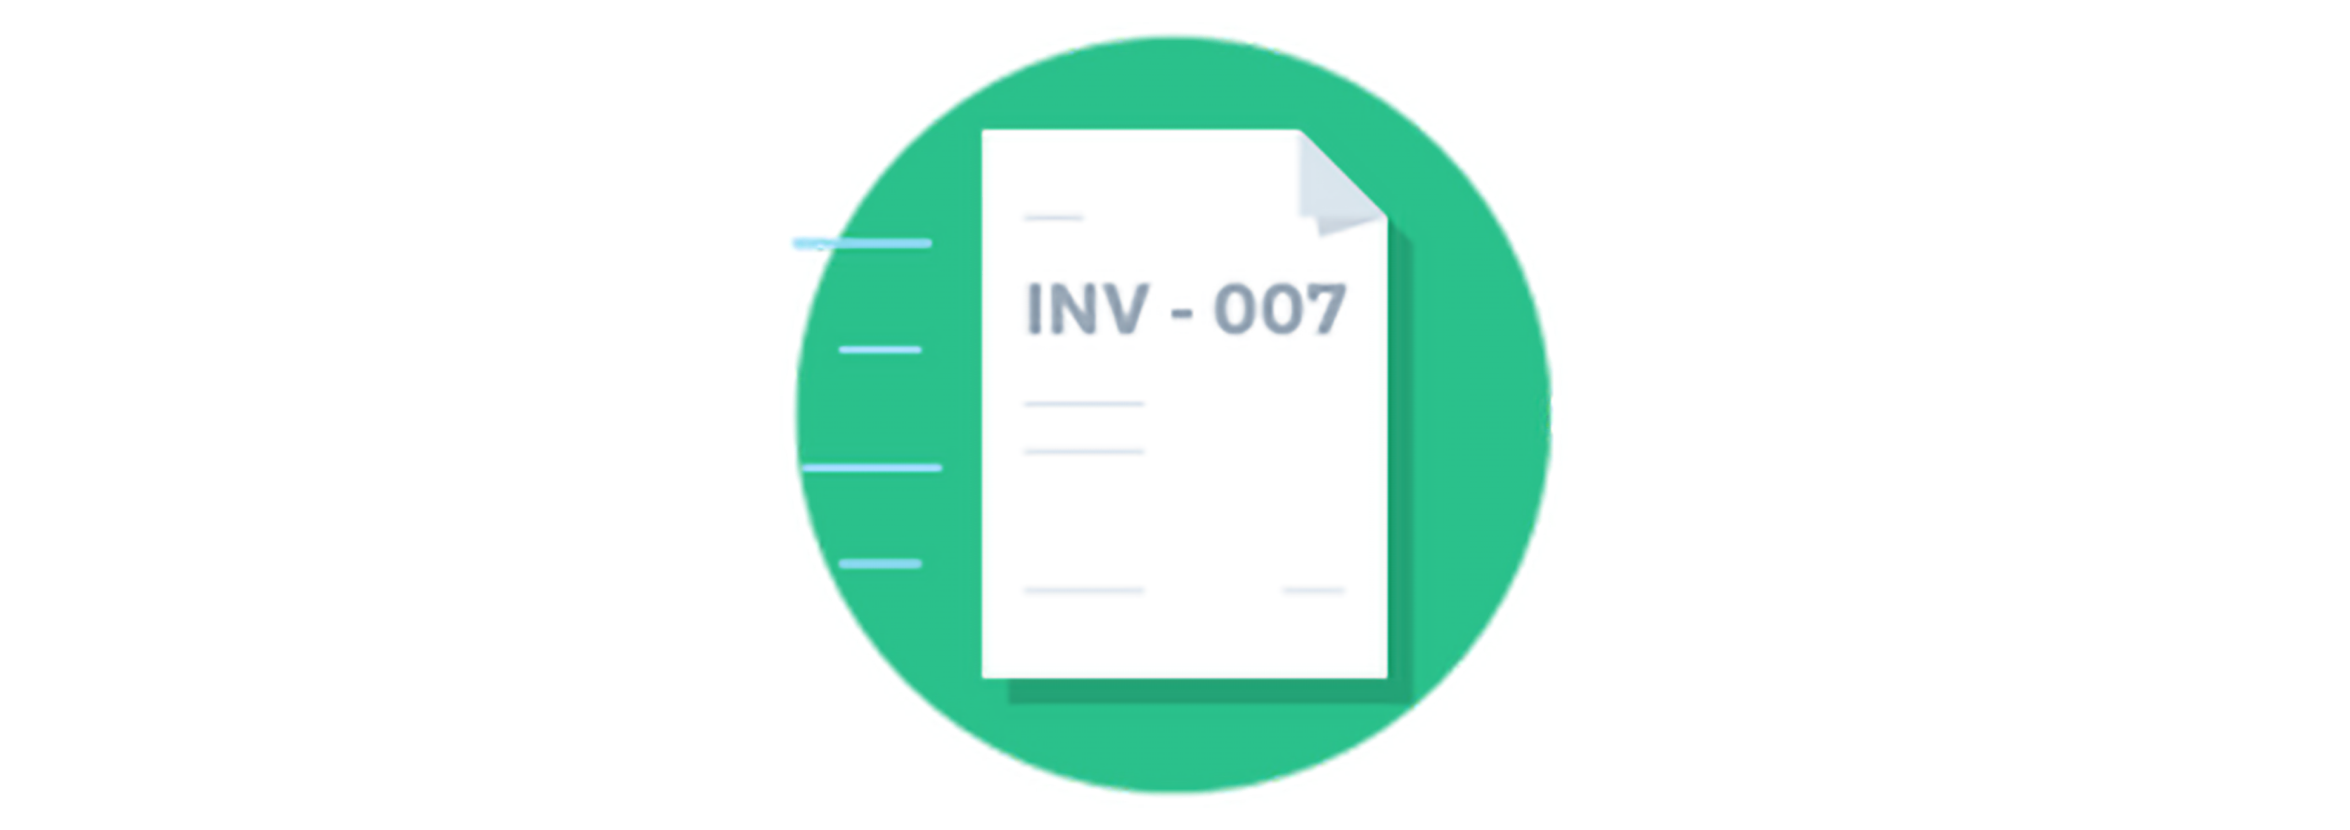 An invoice in front of a green circle.